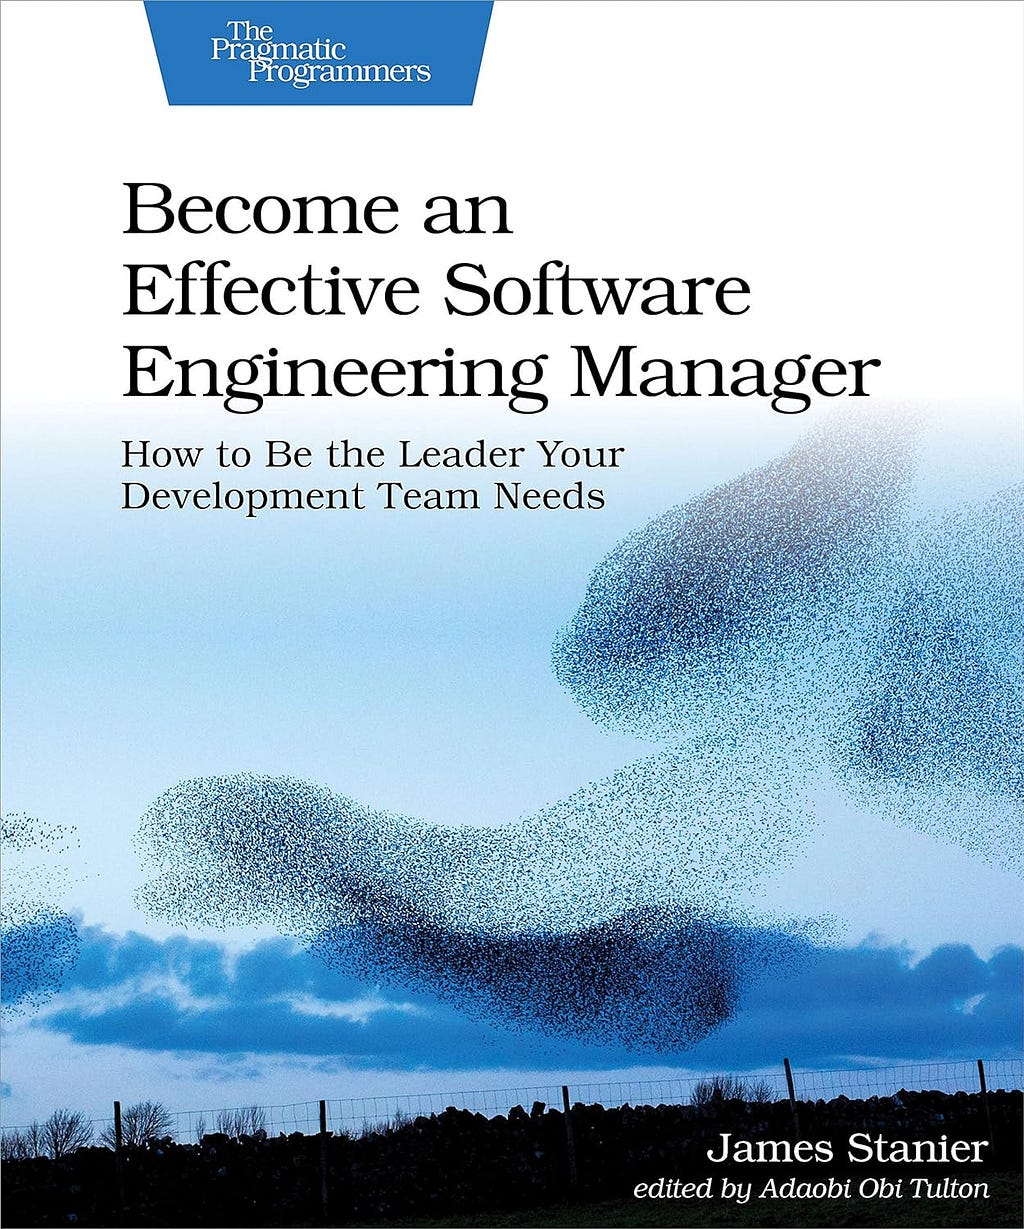 A book cover of the book “Become an Effective Software Engineering Manager”